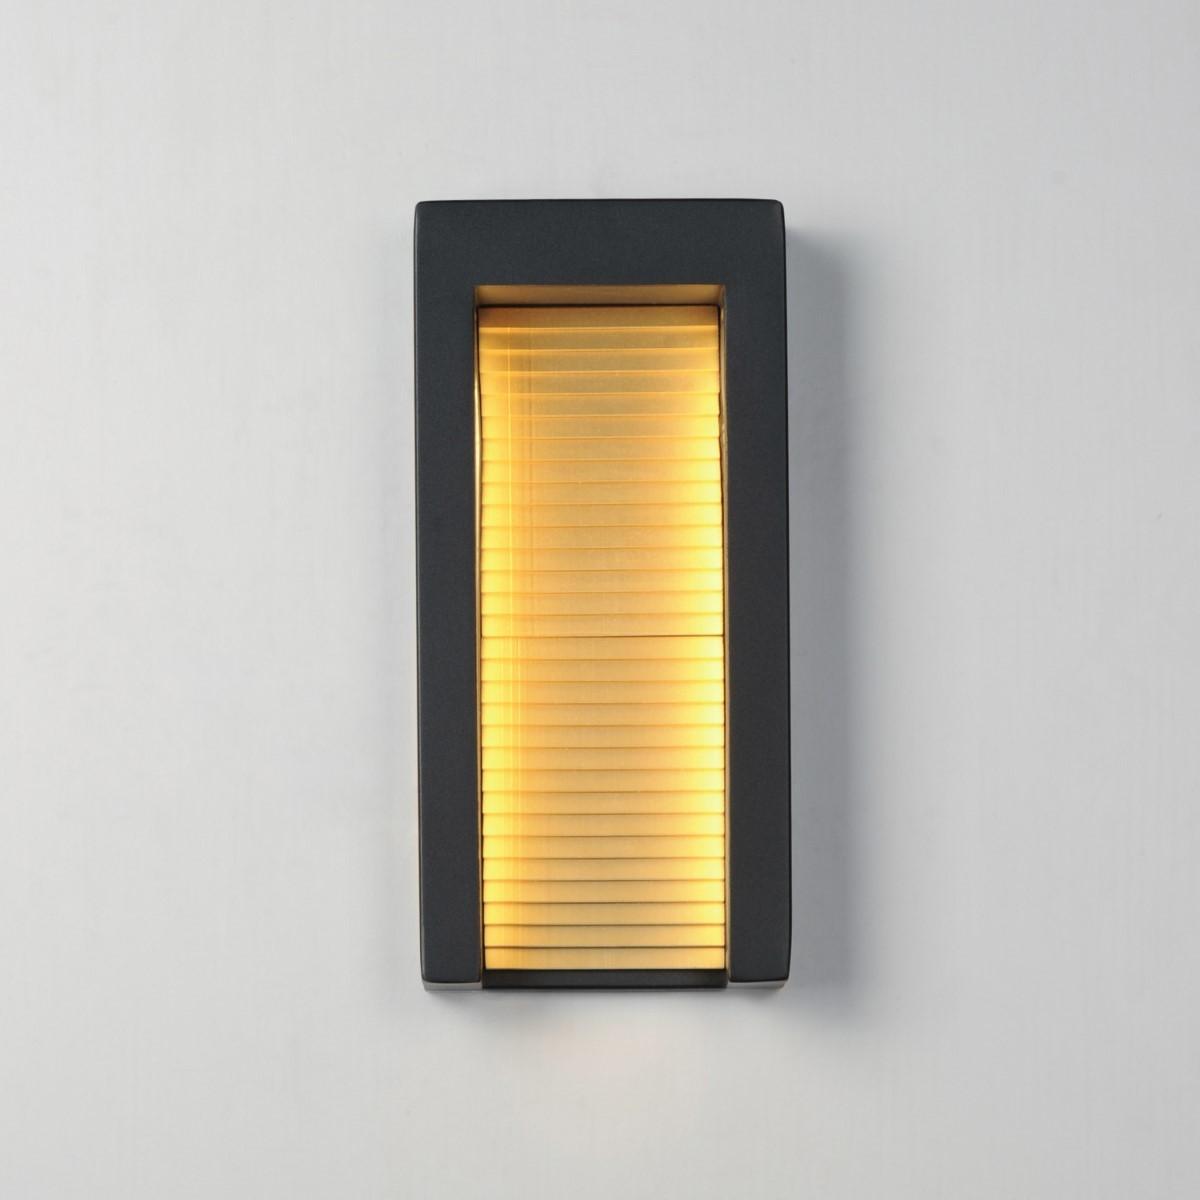 Alcove 14 in. LED Outdoor Wall Sconce 3000K Black & Gold Finish